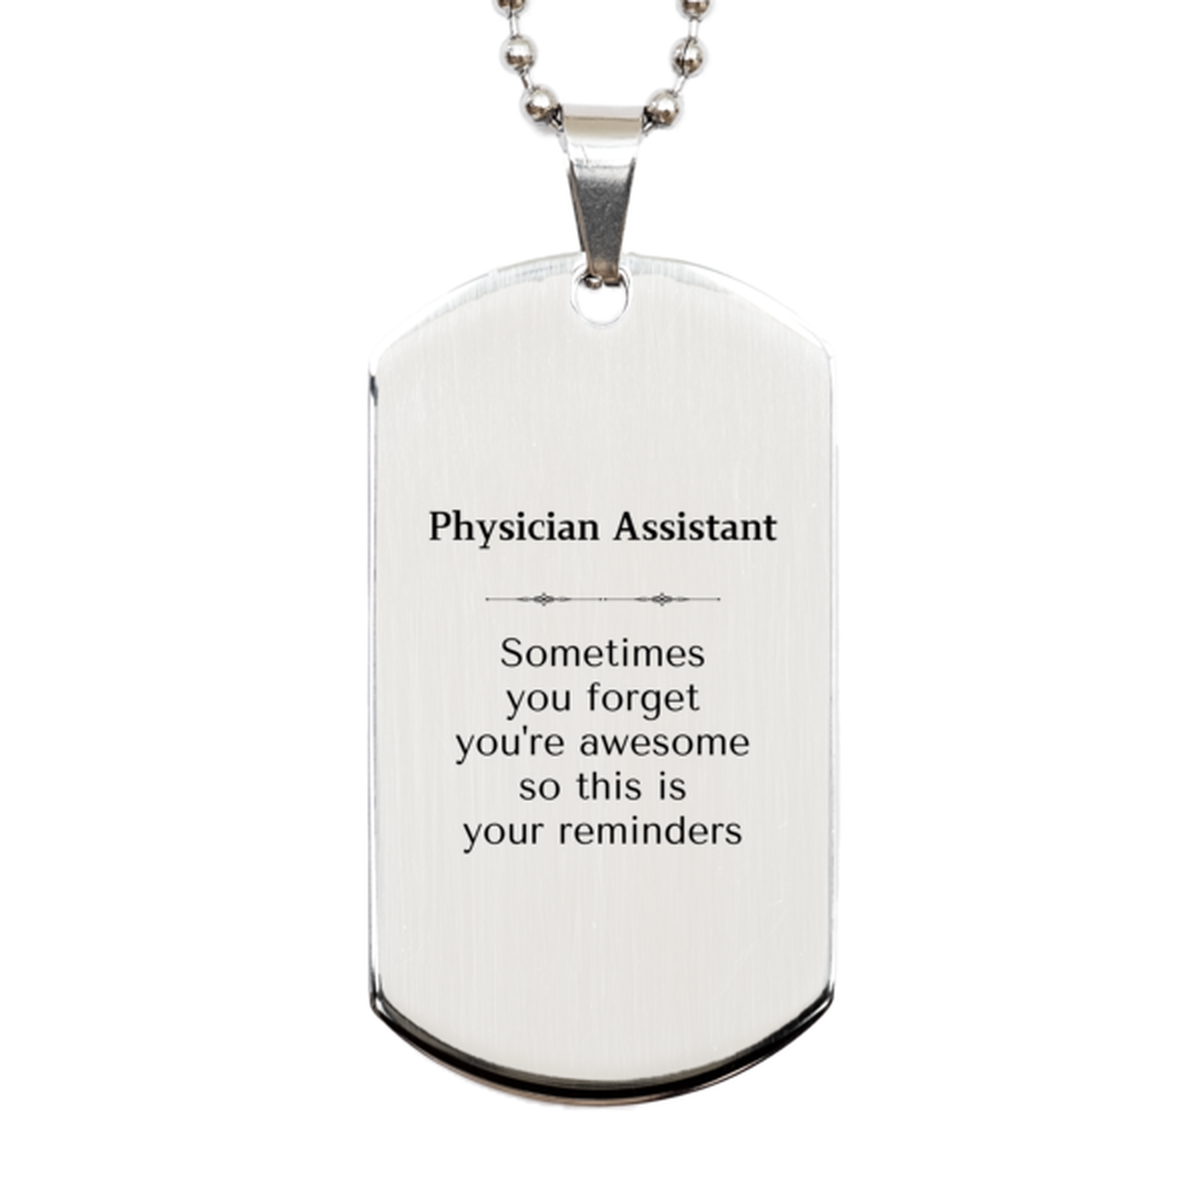 Sentimental Physician Assistant Silver Dog Tag, Physician Assistant Sometimes you forget you're awesome so this is your reminders, Graduation Christmas Birthday Gifts for Physician Assistant, Men, Women, Coworkers